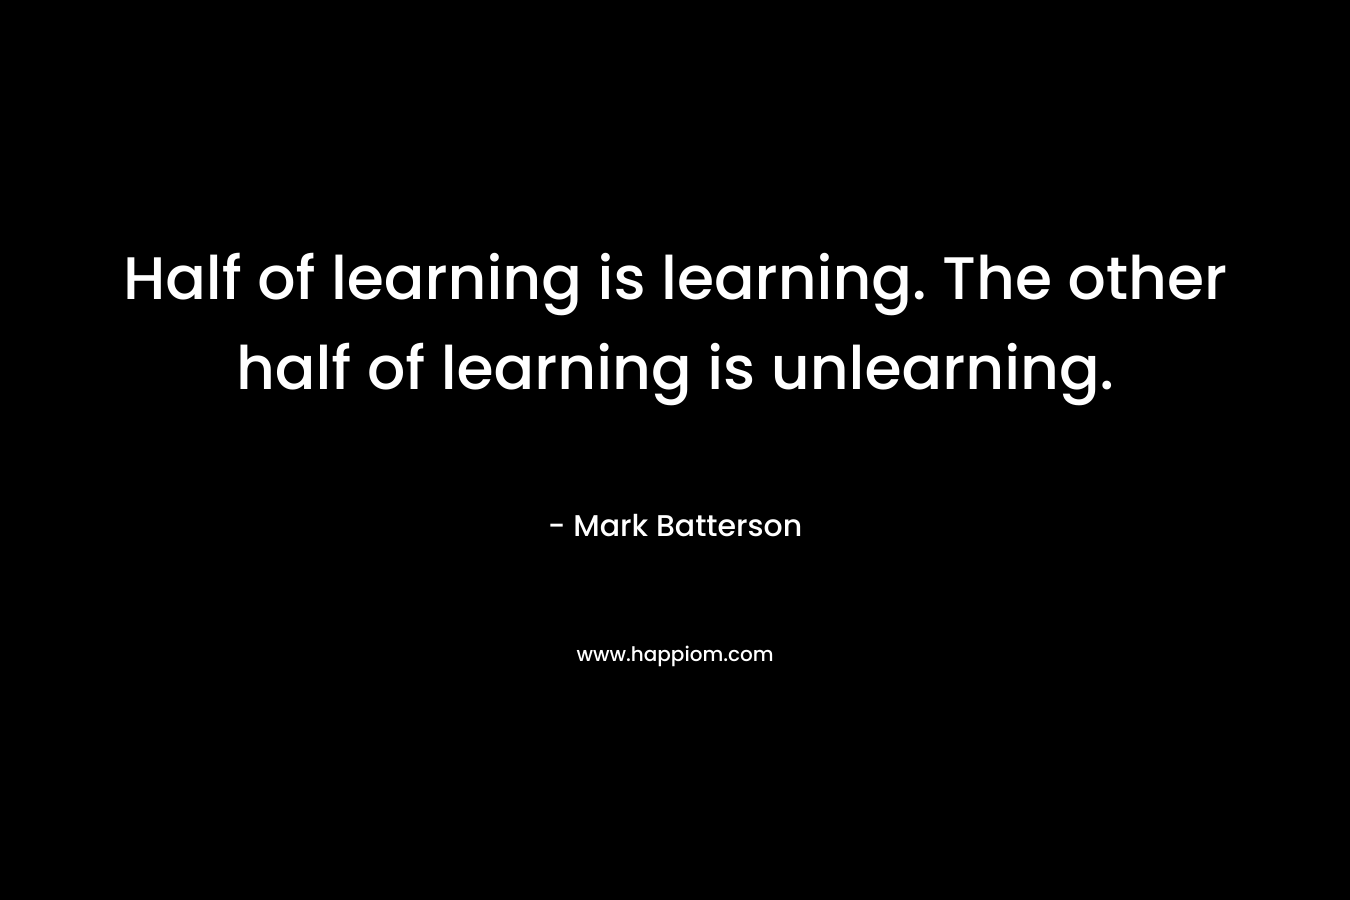 Half of learning is learning. The other half of learning is unlearning.